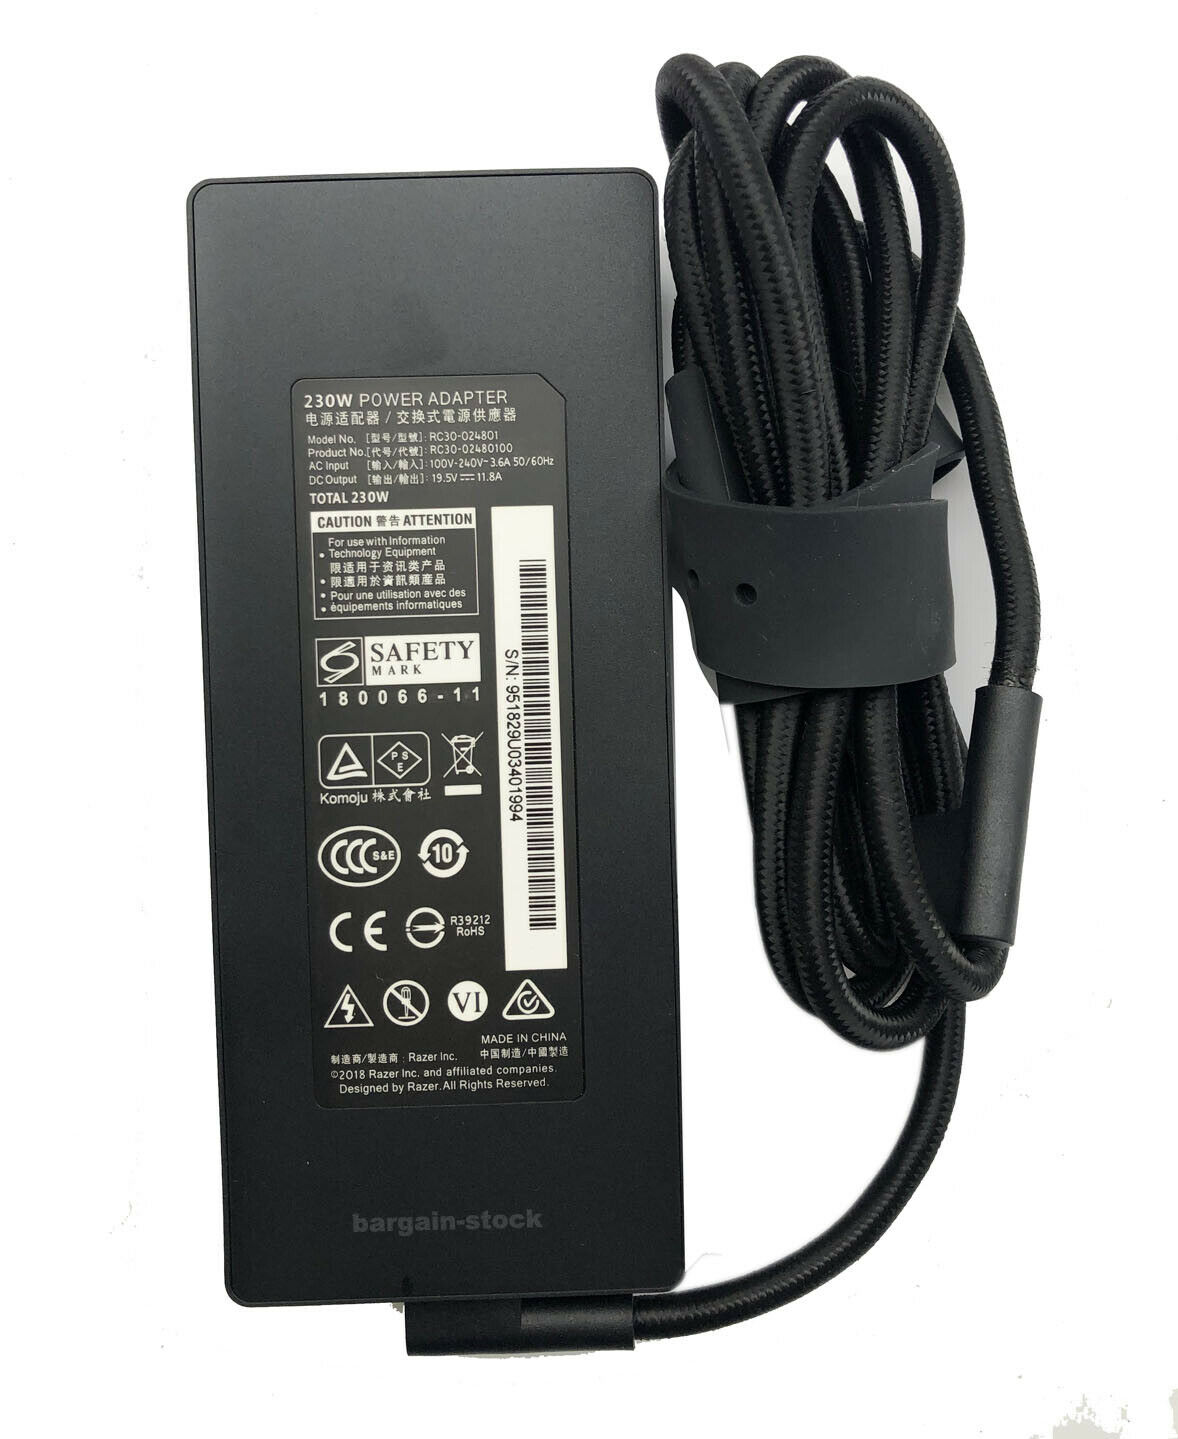 Genuine 19.5V 11.8A 230W Razer Blade Pro 17 AC Power Adapter Charger RC30-024801 Country/Region of Manufacture: China